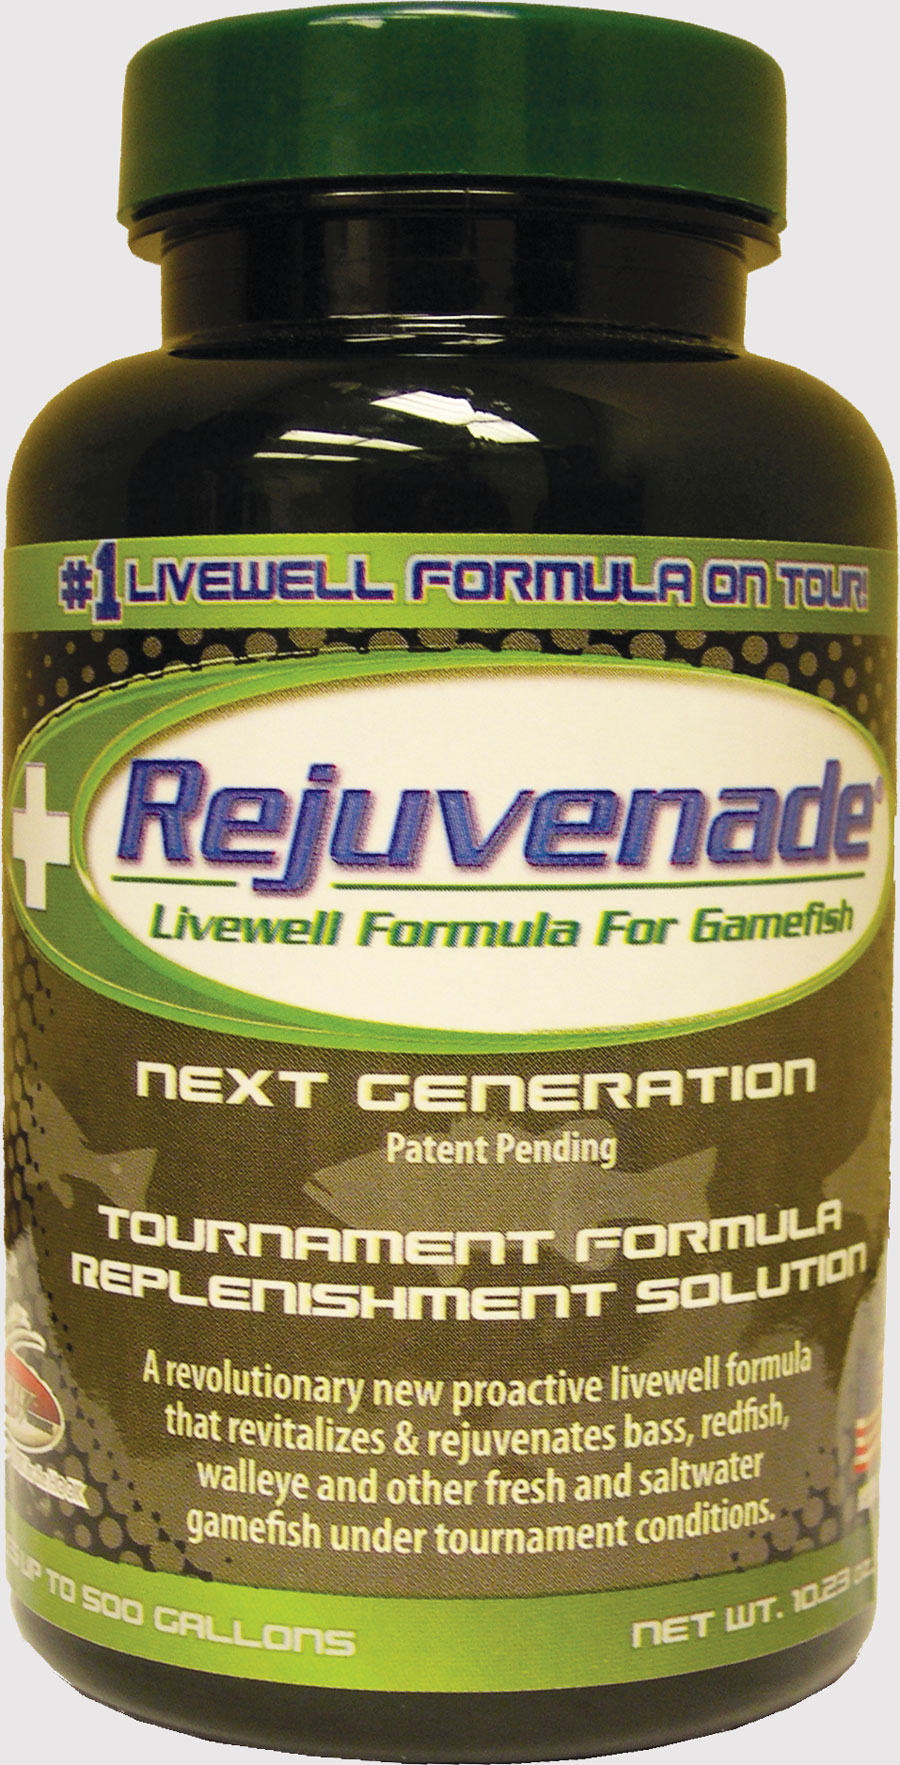 Additives such as Rejuvenade from BassMedics help keep fish alive from catch to release